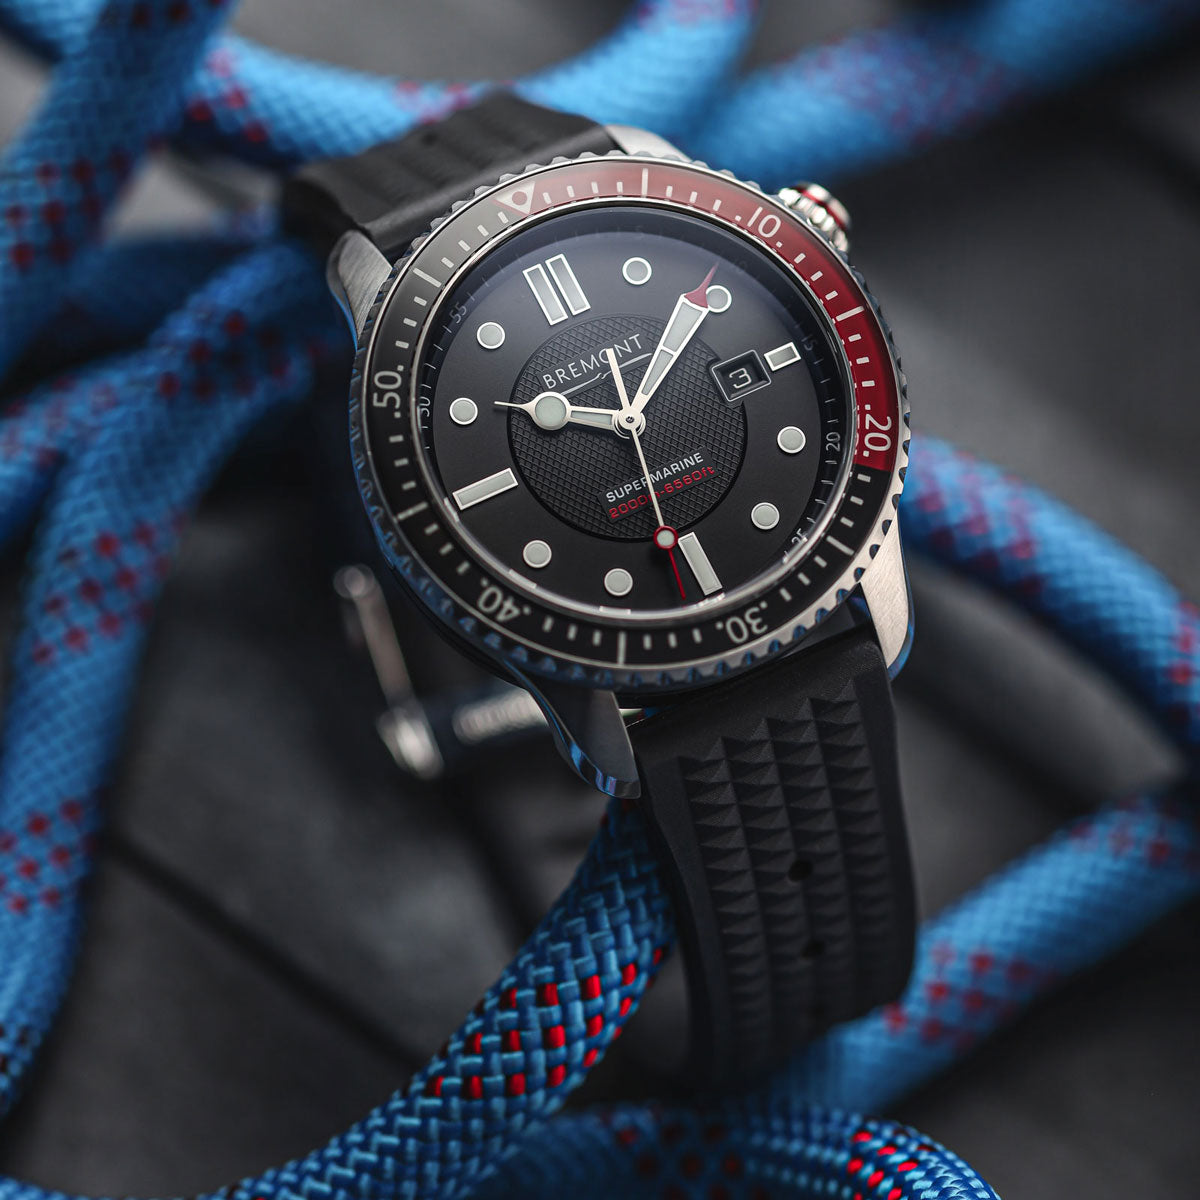 ZULUDIVER Special Rubber Dive Watch Strap Pack - additional image 1